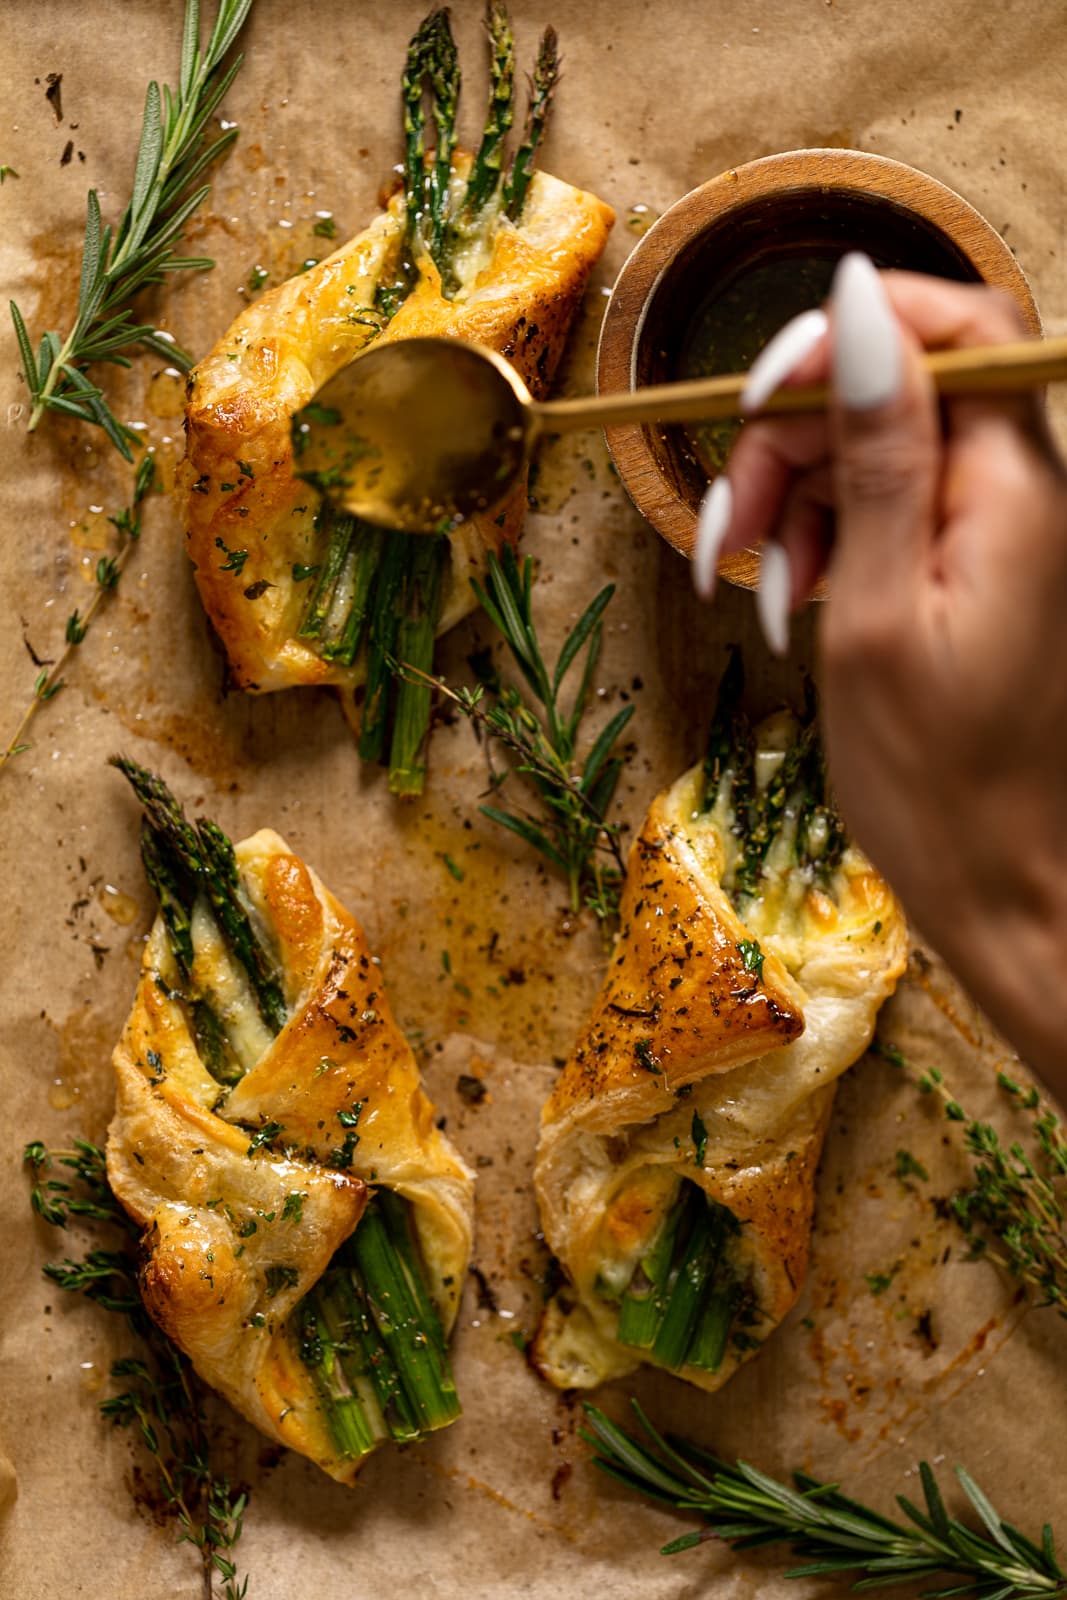 Hand using a spoon to drizzle herb honey on an Asparagus and Mozzarella Puff Pastry